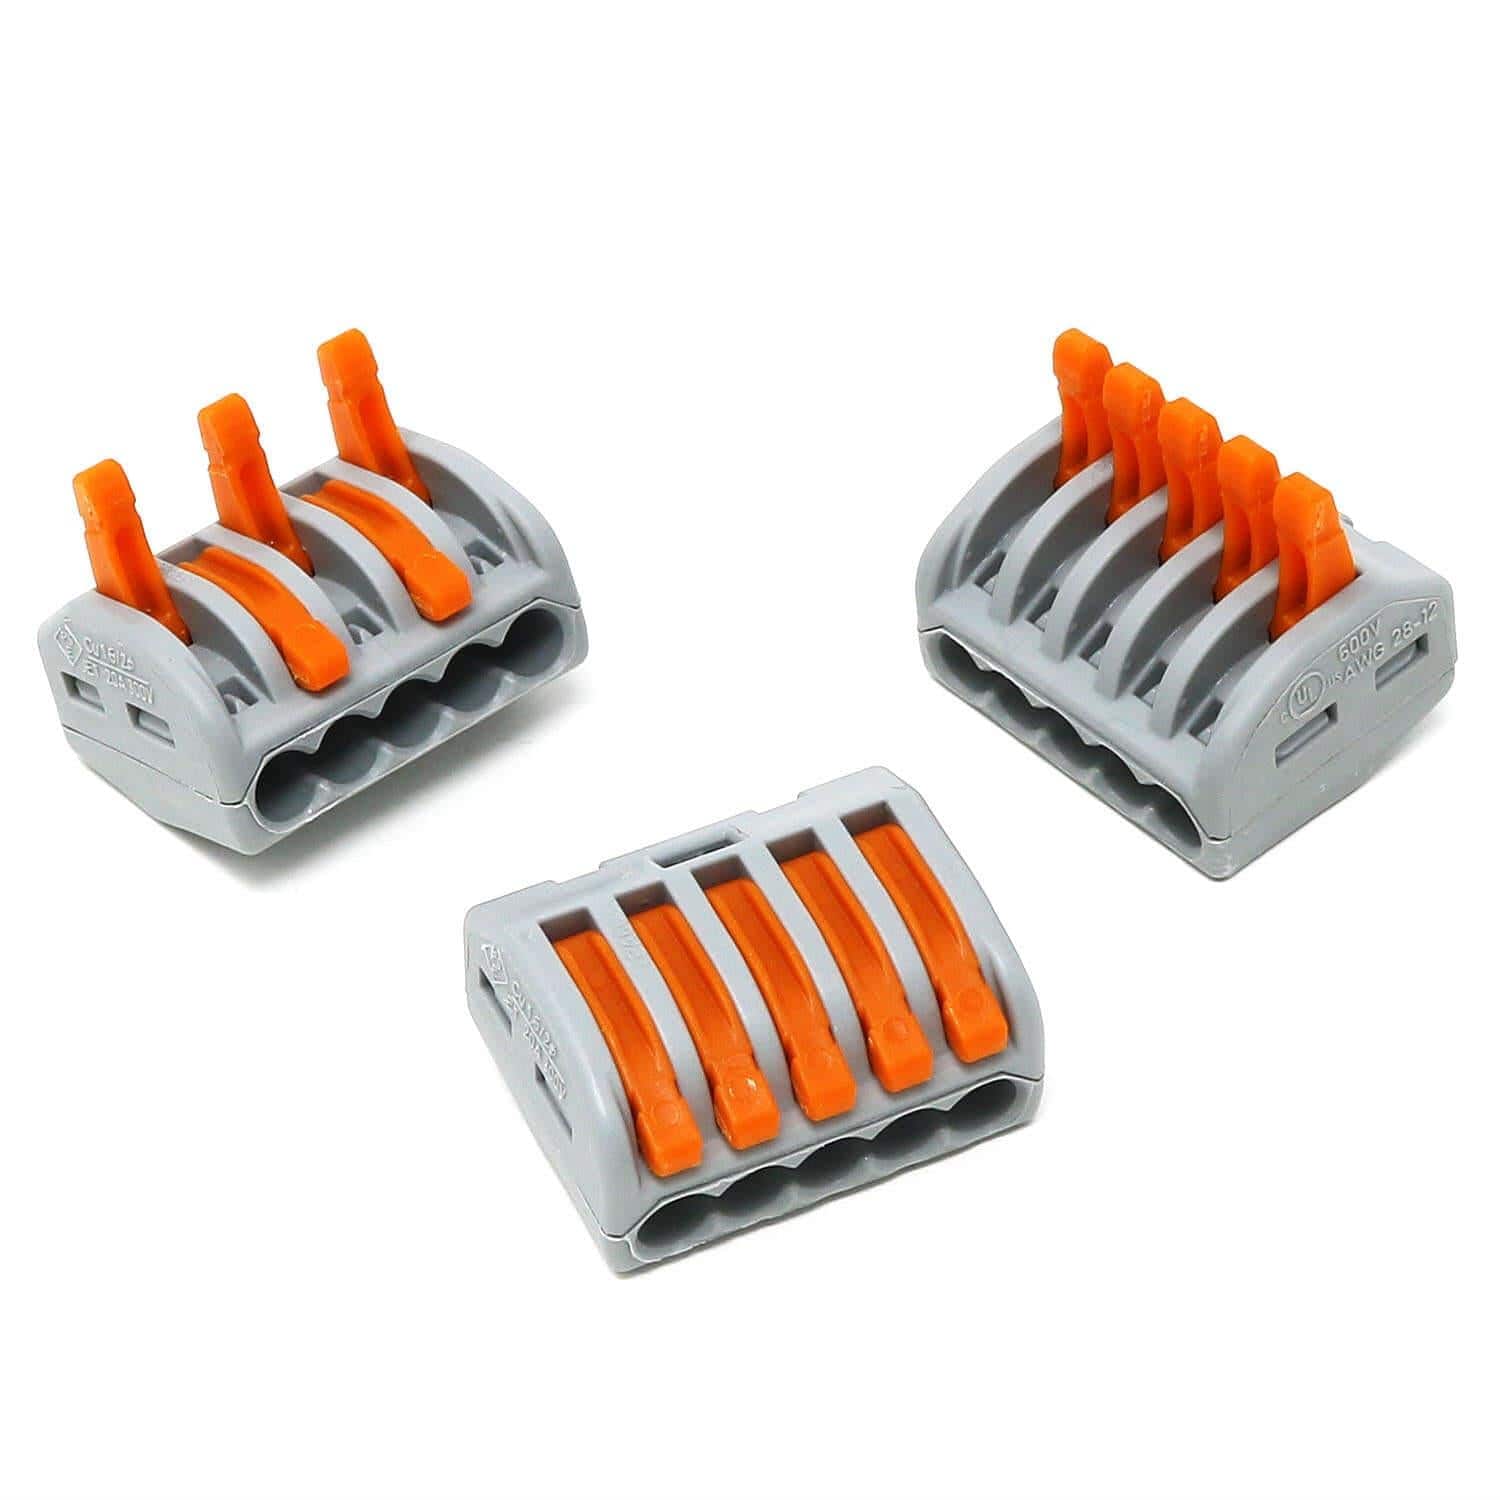 Wago Compact Splicing Wire Connector, 3 Conductor, Up to 10 AWG